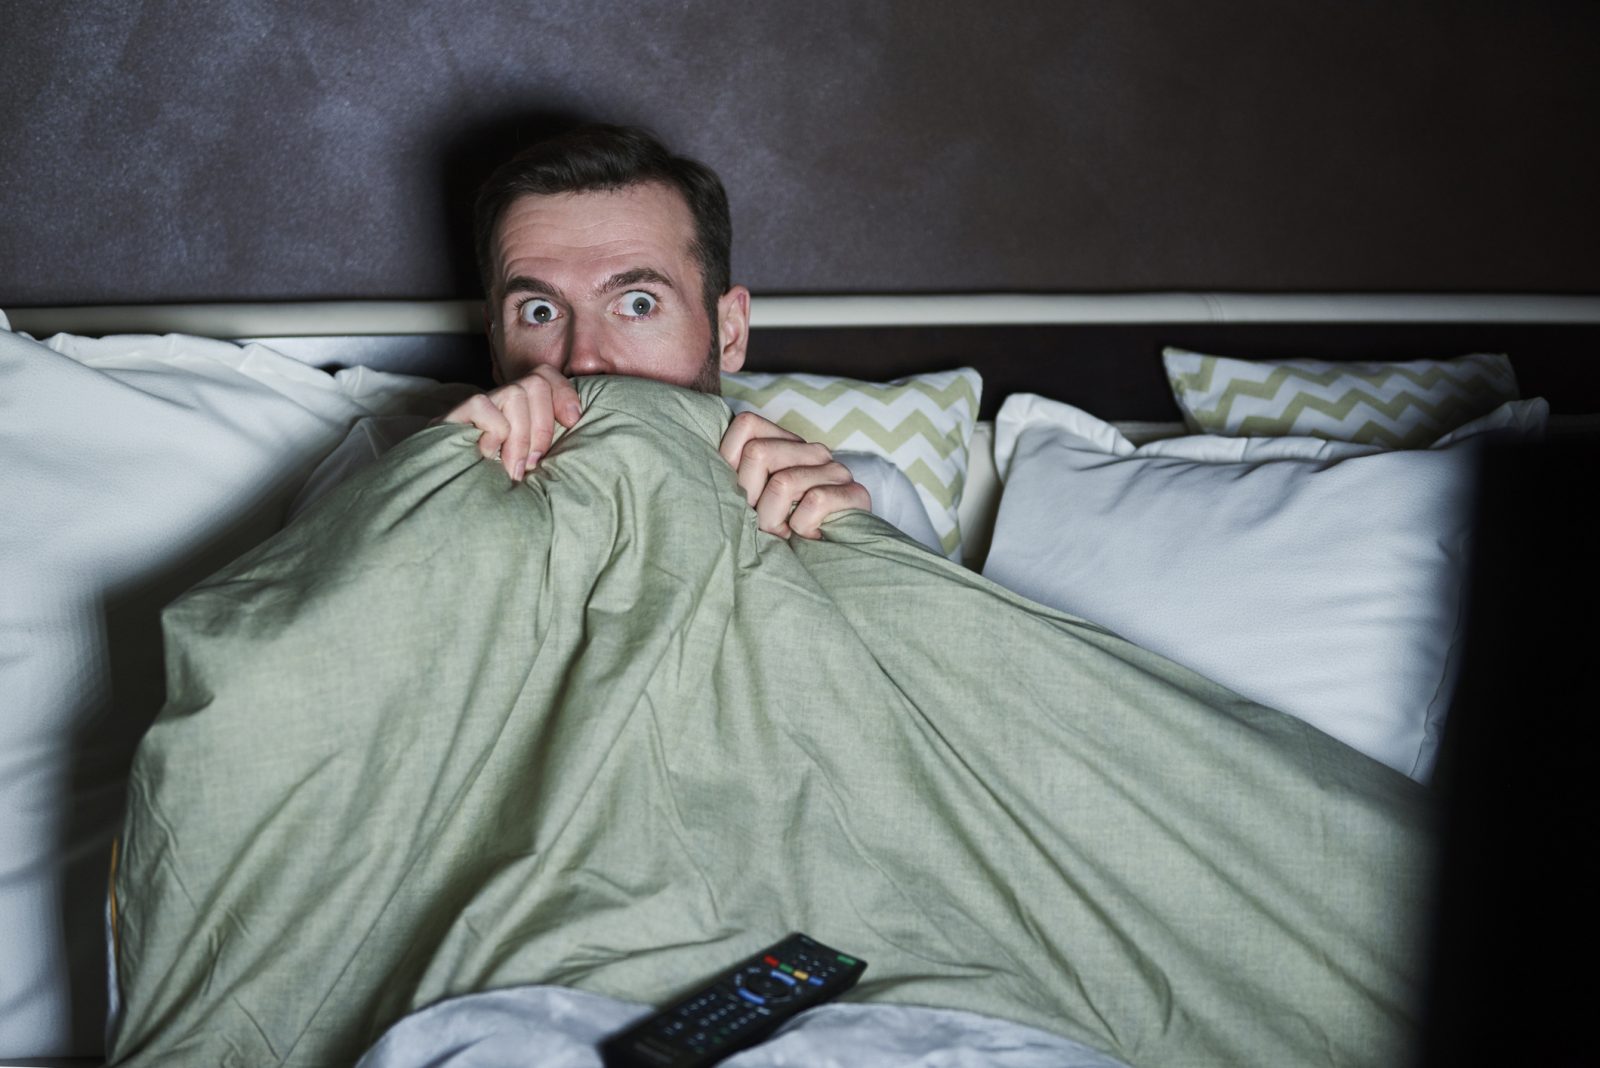 A man sitting up in bed peeks over a blanket with a remote control on his lap.